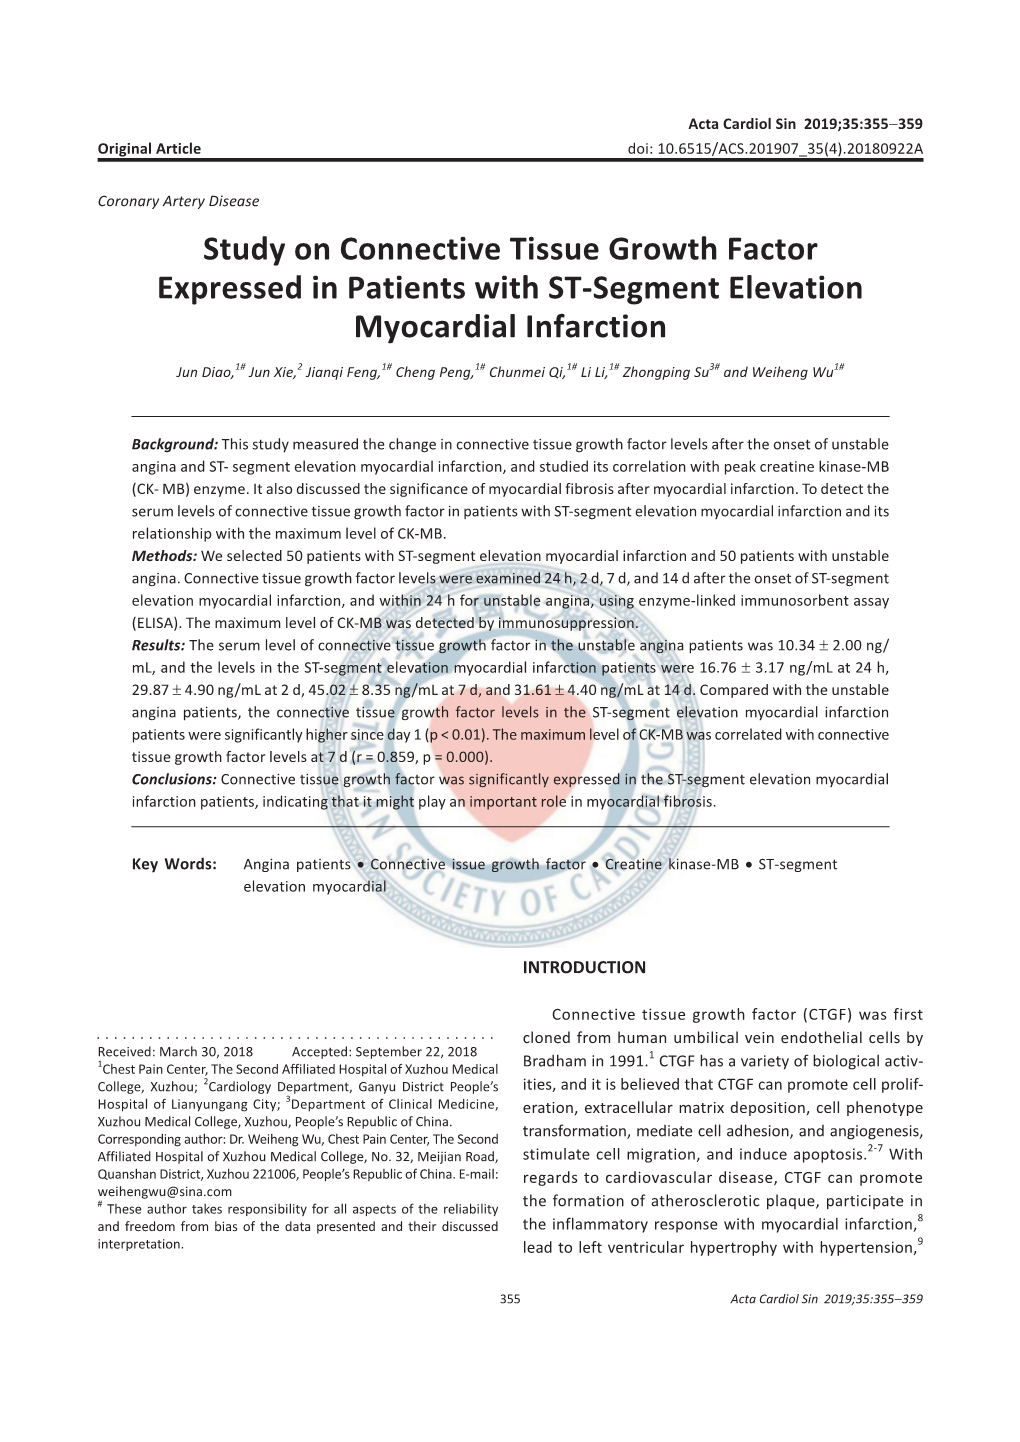 Study on Connective Tissue Growth Factor Expressed in Patients with ST-Segment Elevation Myocardial Infarction